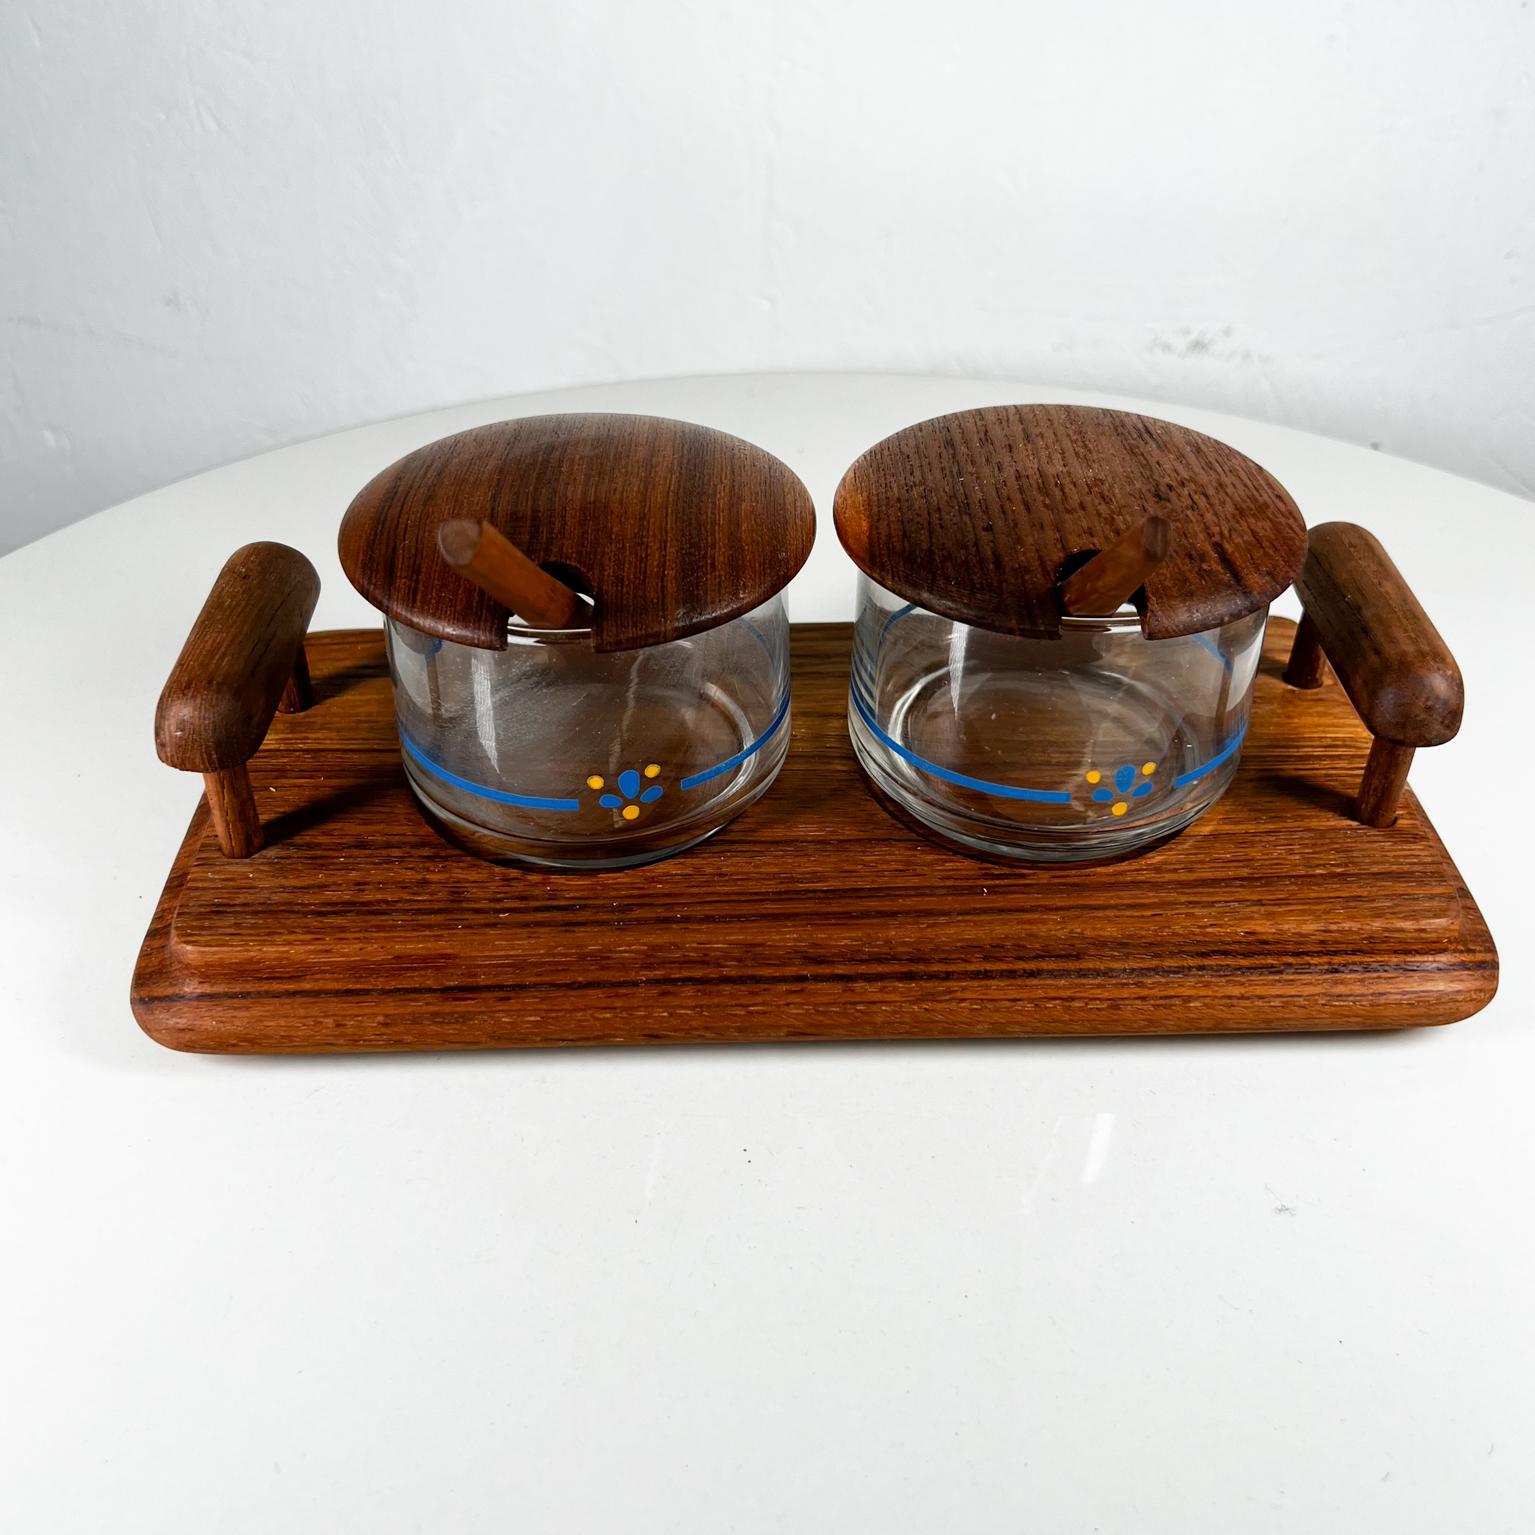 Vintage Modern Condiment Server Set Teakwood by GoodWood
Maker stamp present
Fun Condiment Tray with 2 glass containers. Mustard, Salsa Relish etc
Teak wood with matching lids and 2 Teak spoons.
Original unrestored vintage condition.
11 x 5.5